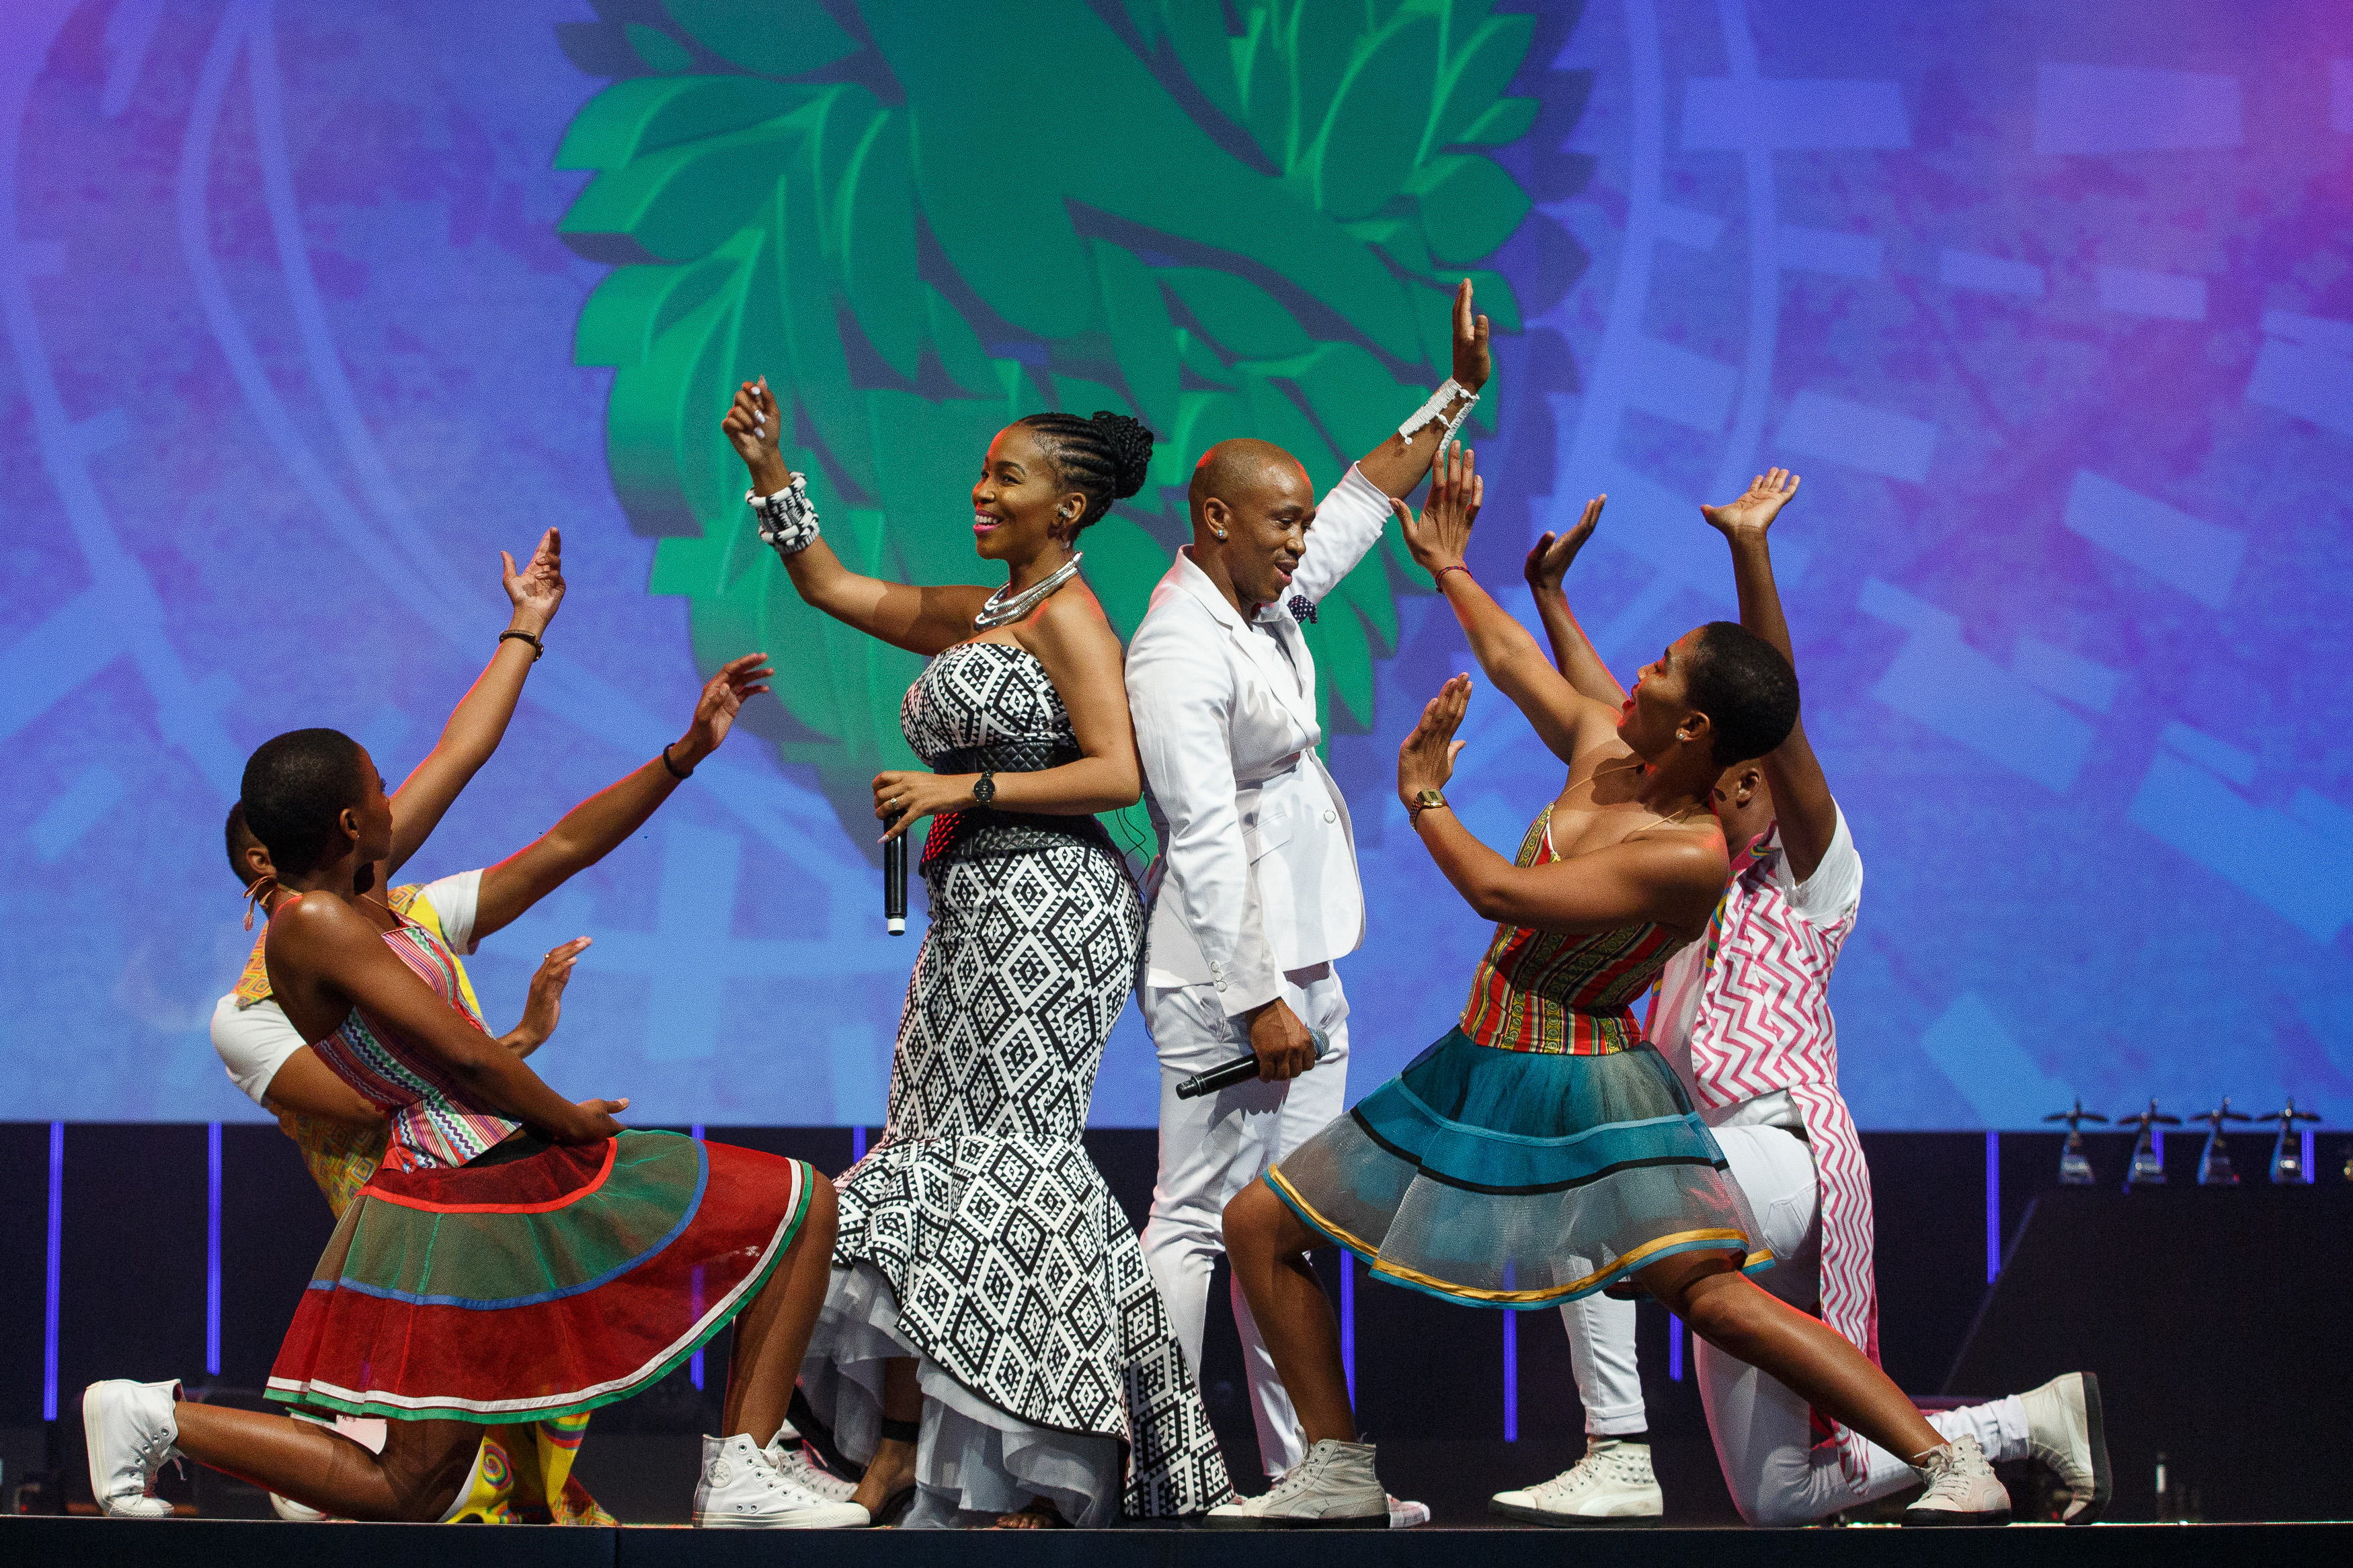 DURBAN, SOUTH AFRICA - AUGUST 21: Performance by Mafikizolo during the Sunday Loerie Awards Ceremony at the ICC on August 21, 2016 in Durban, South Africa. (Photo by Jethro Snyders/2016 Loerie Awards)